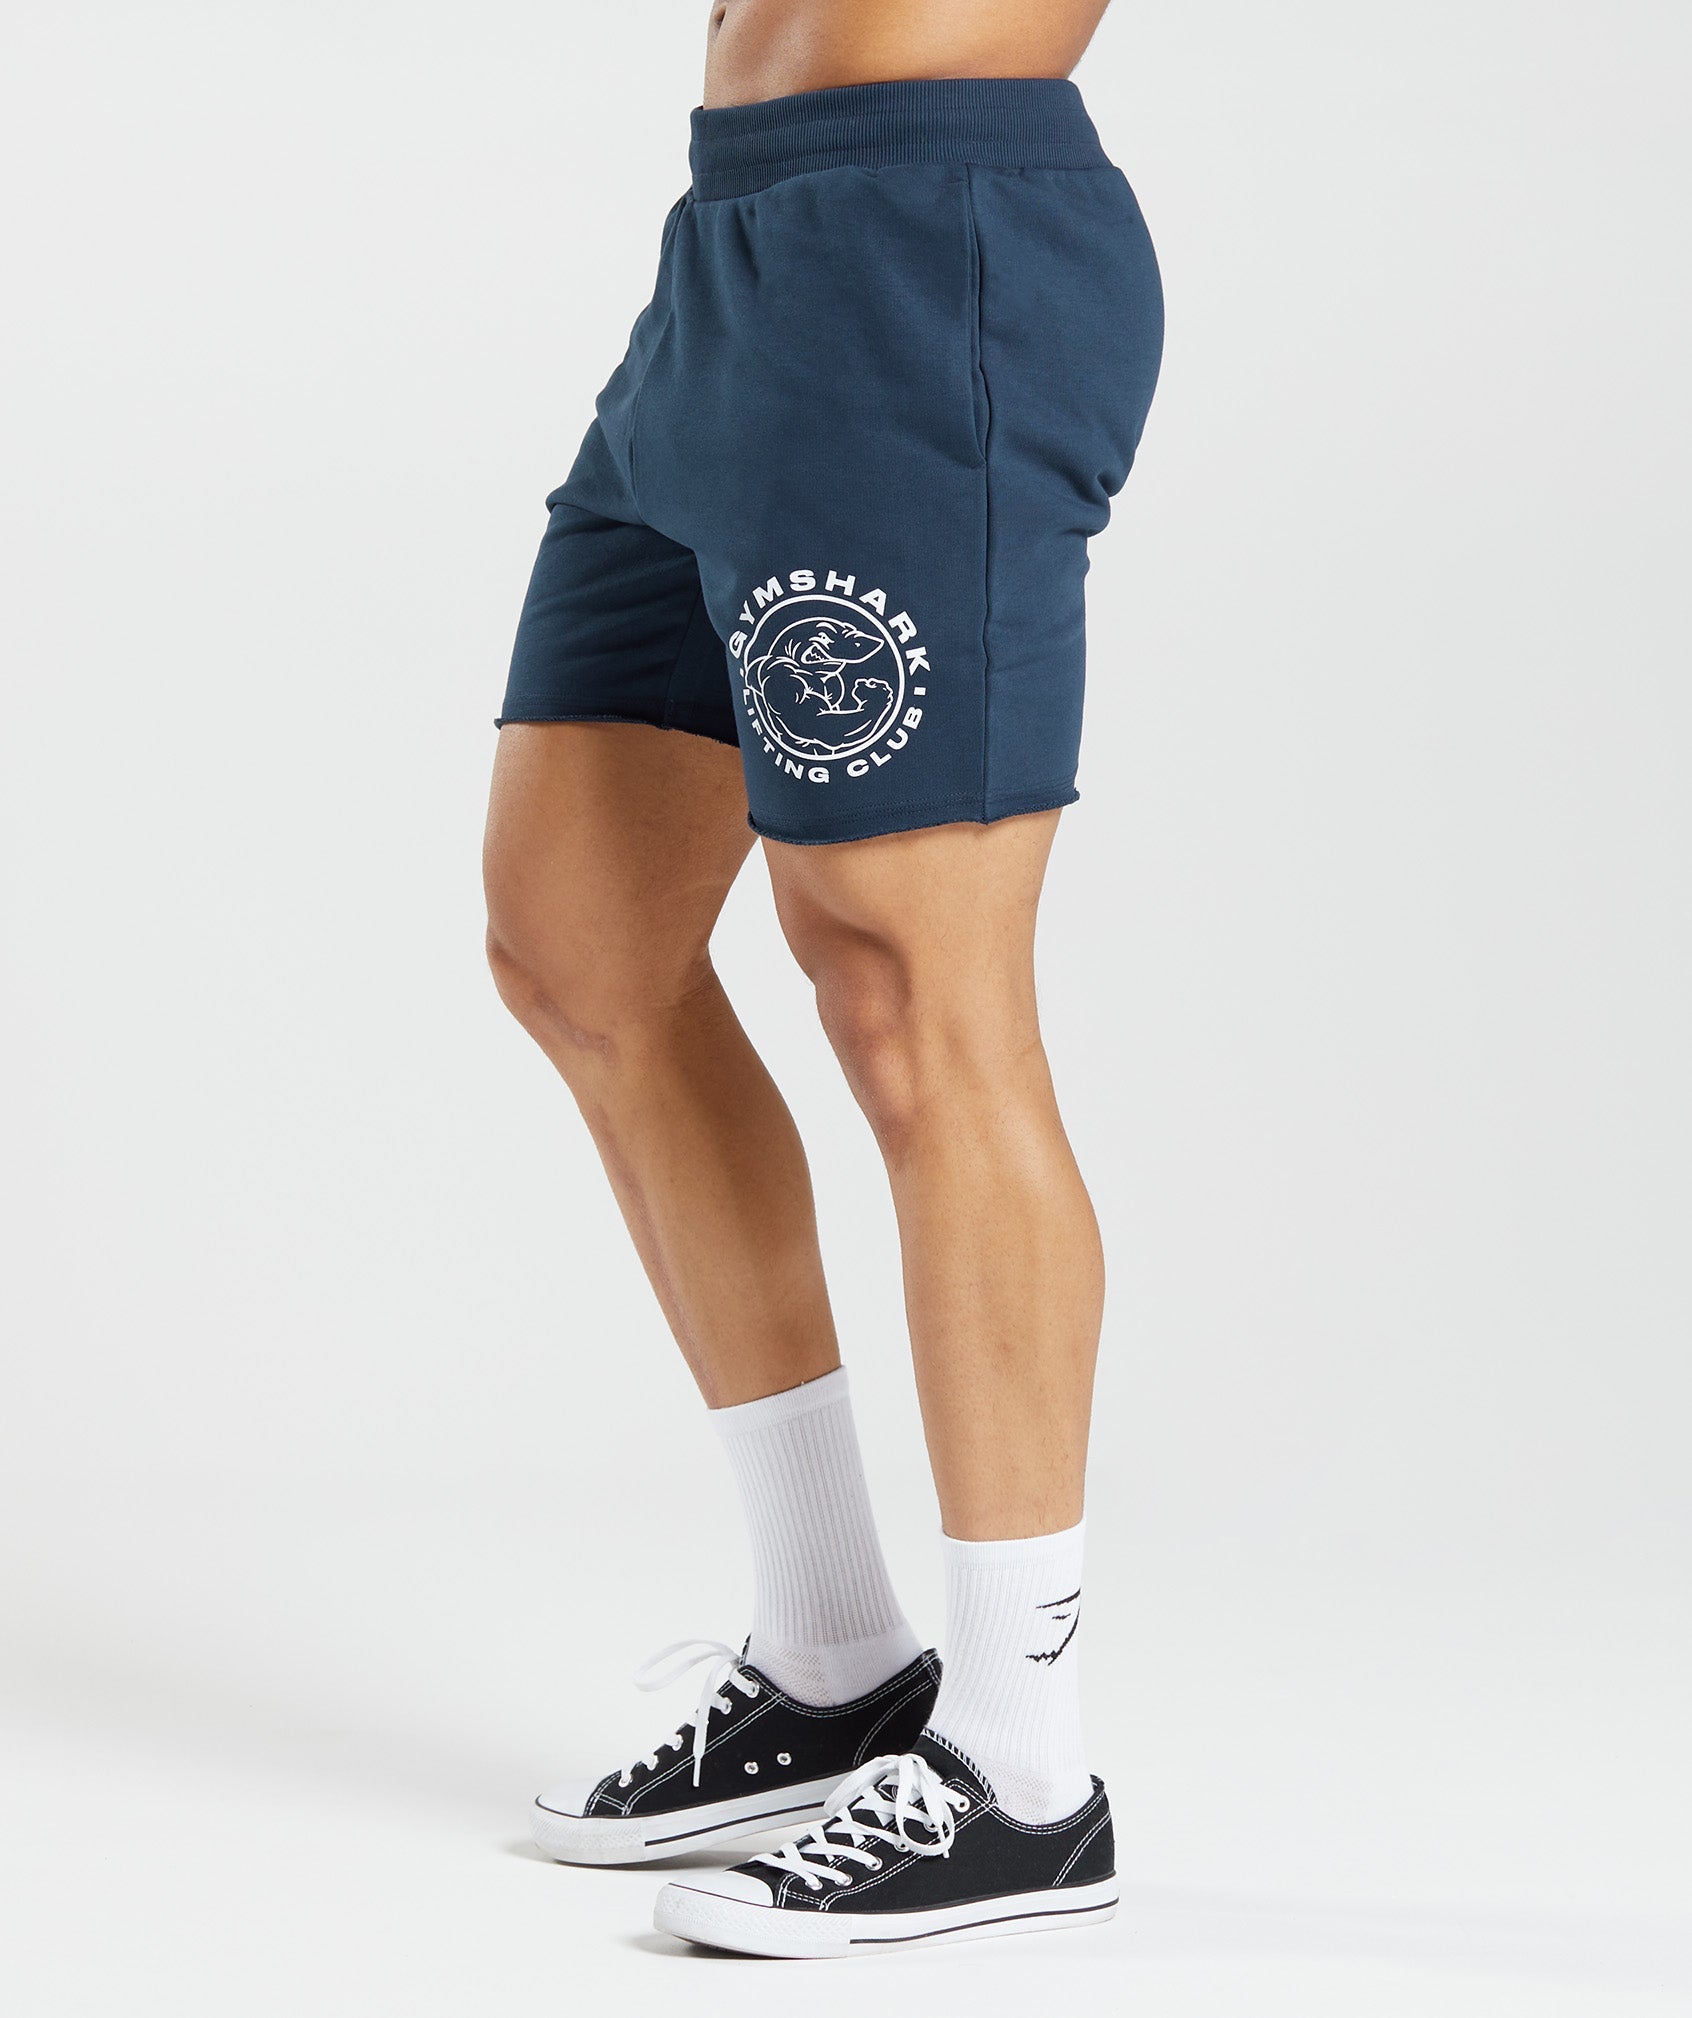 Legacy Shorts in Navy - view 3